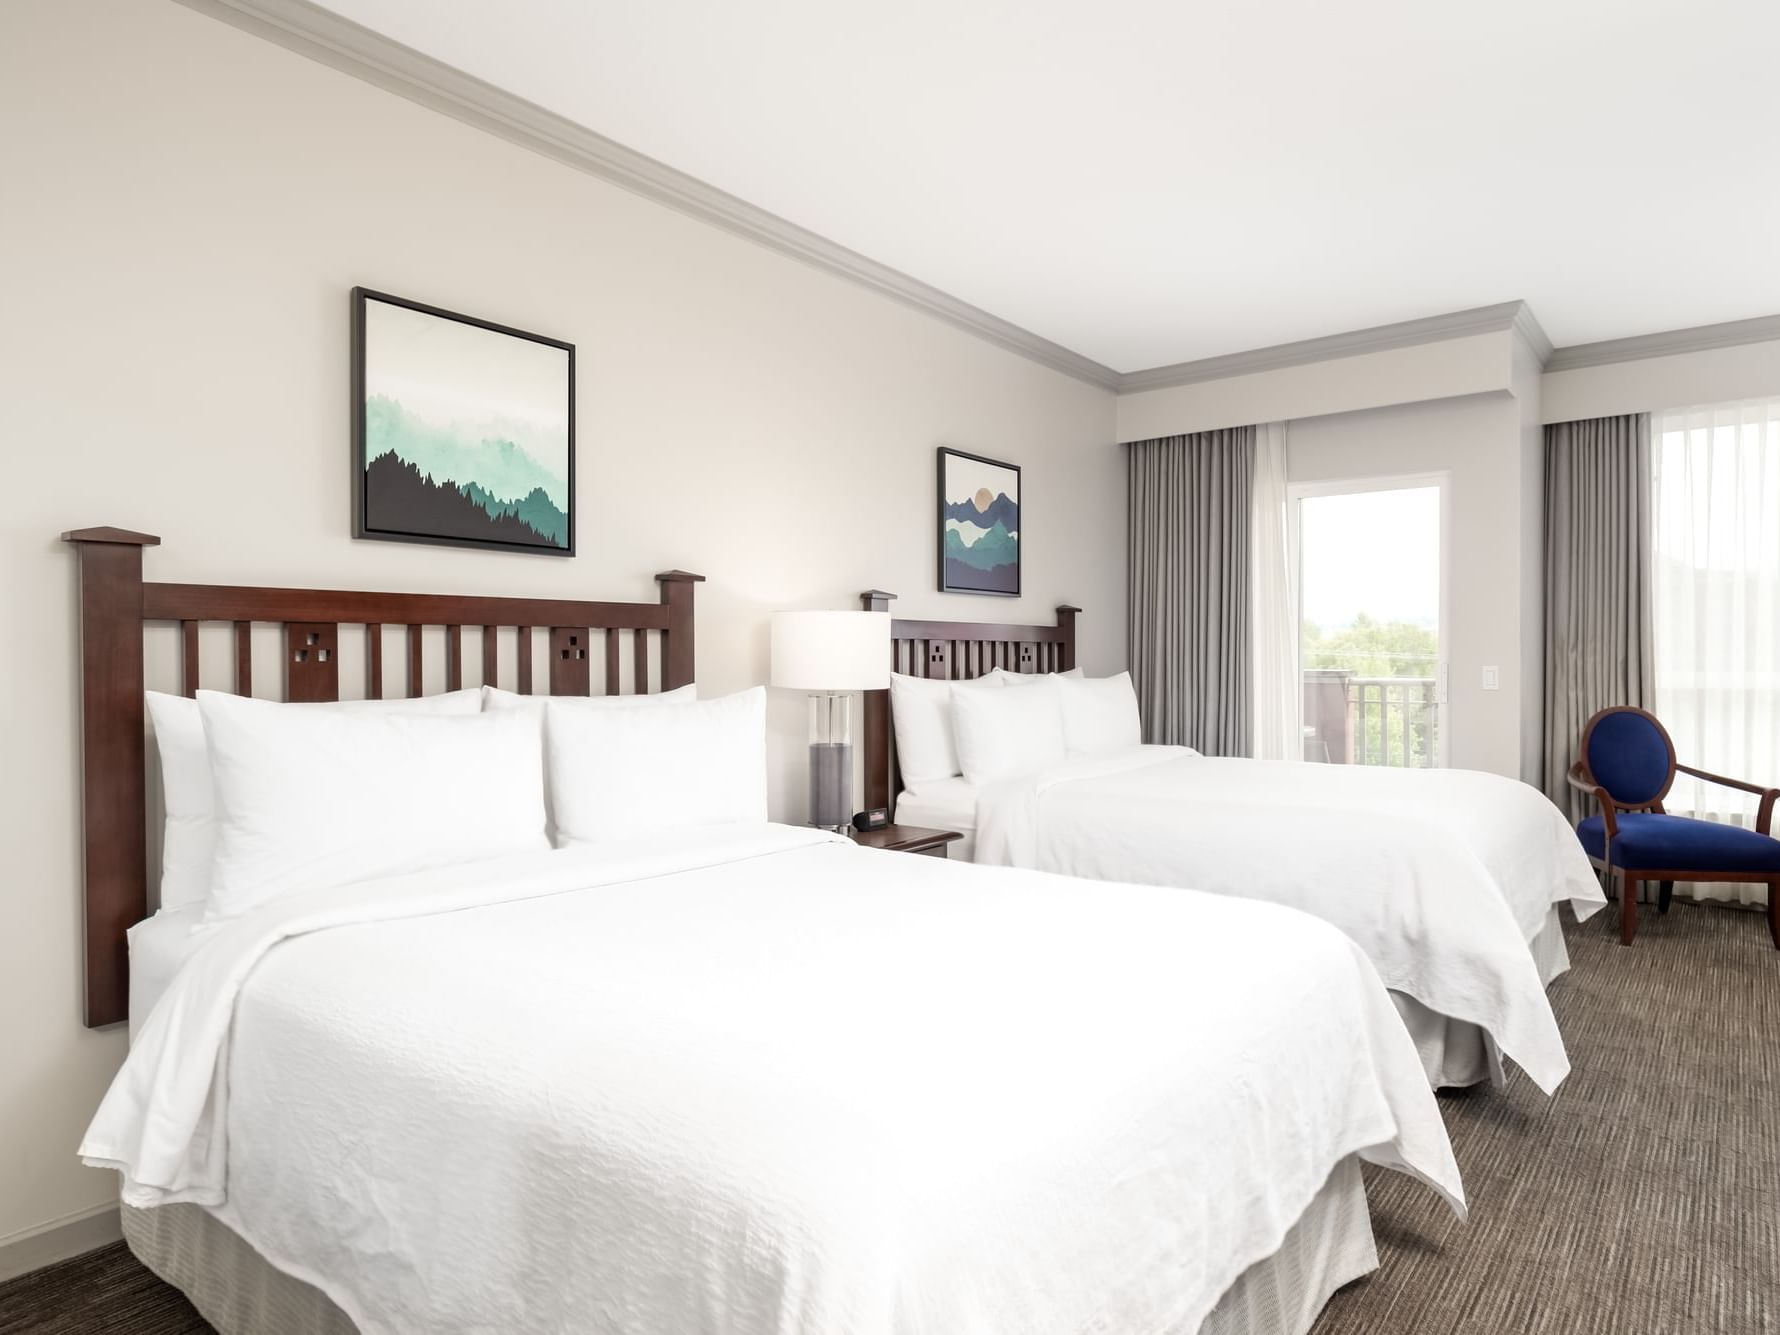 Interior of Deluxe Guest Room at Manteo Resort Waterfront